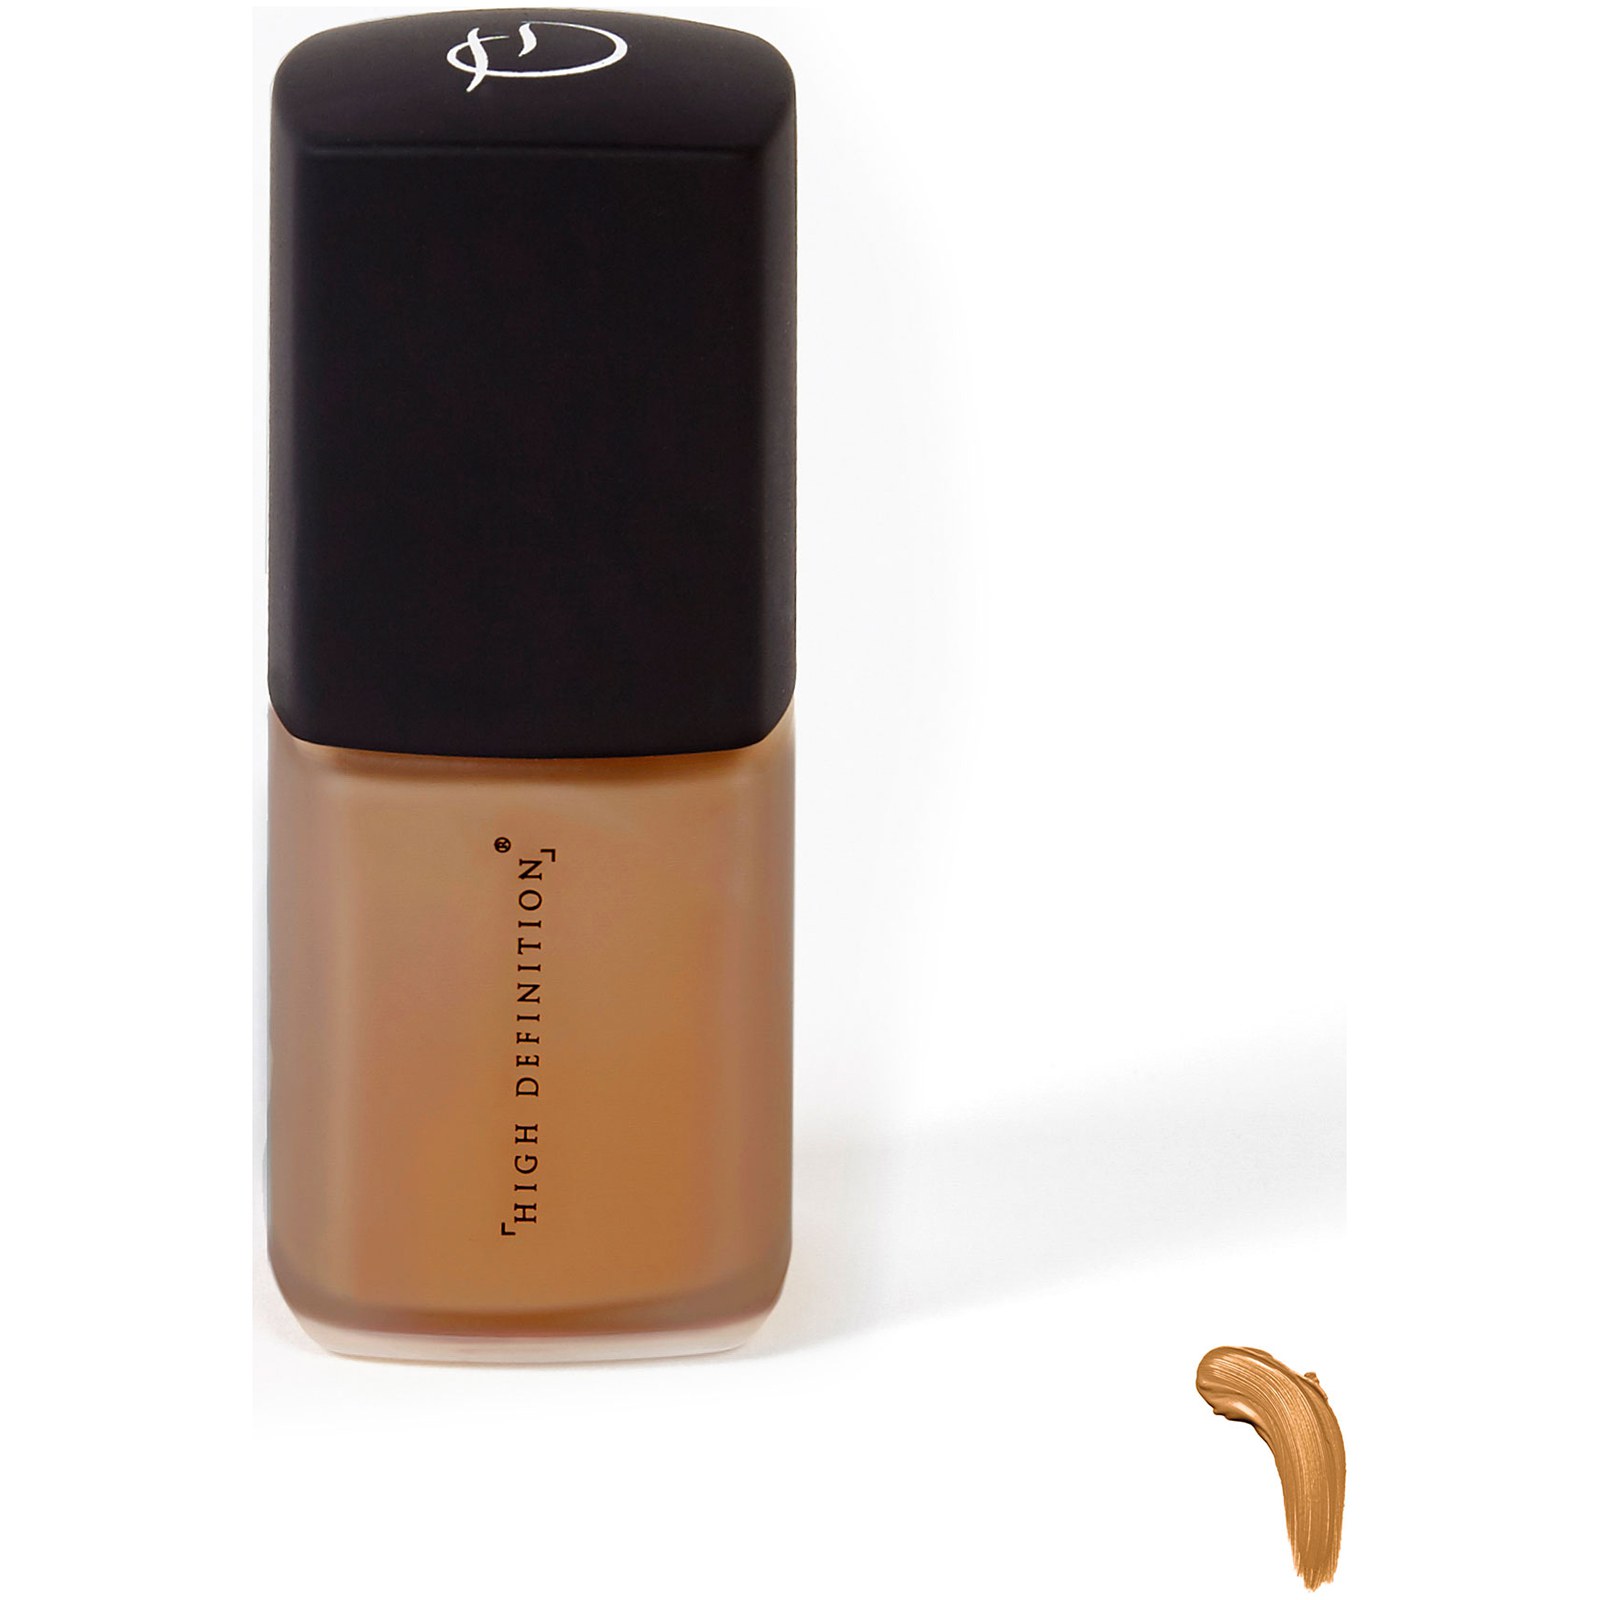 HD Brows Fluid Foundation (Various Shades) - 8 Golden